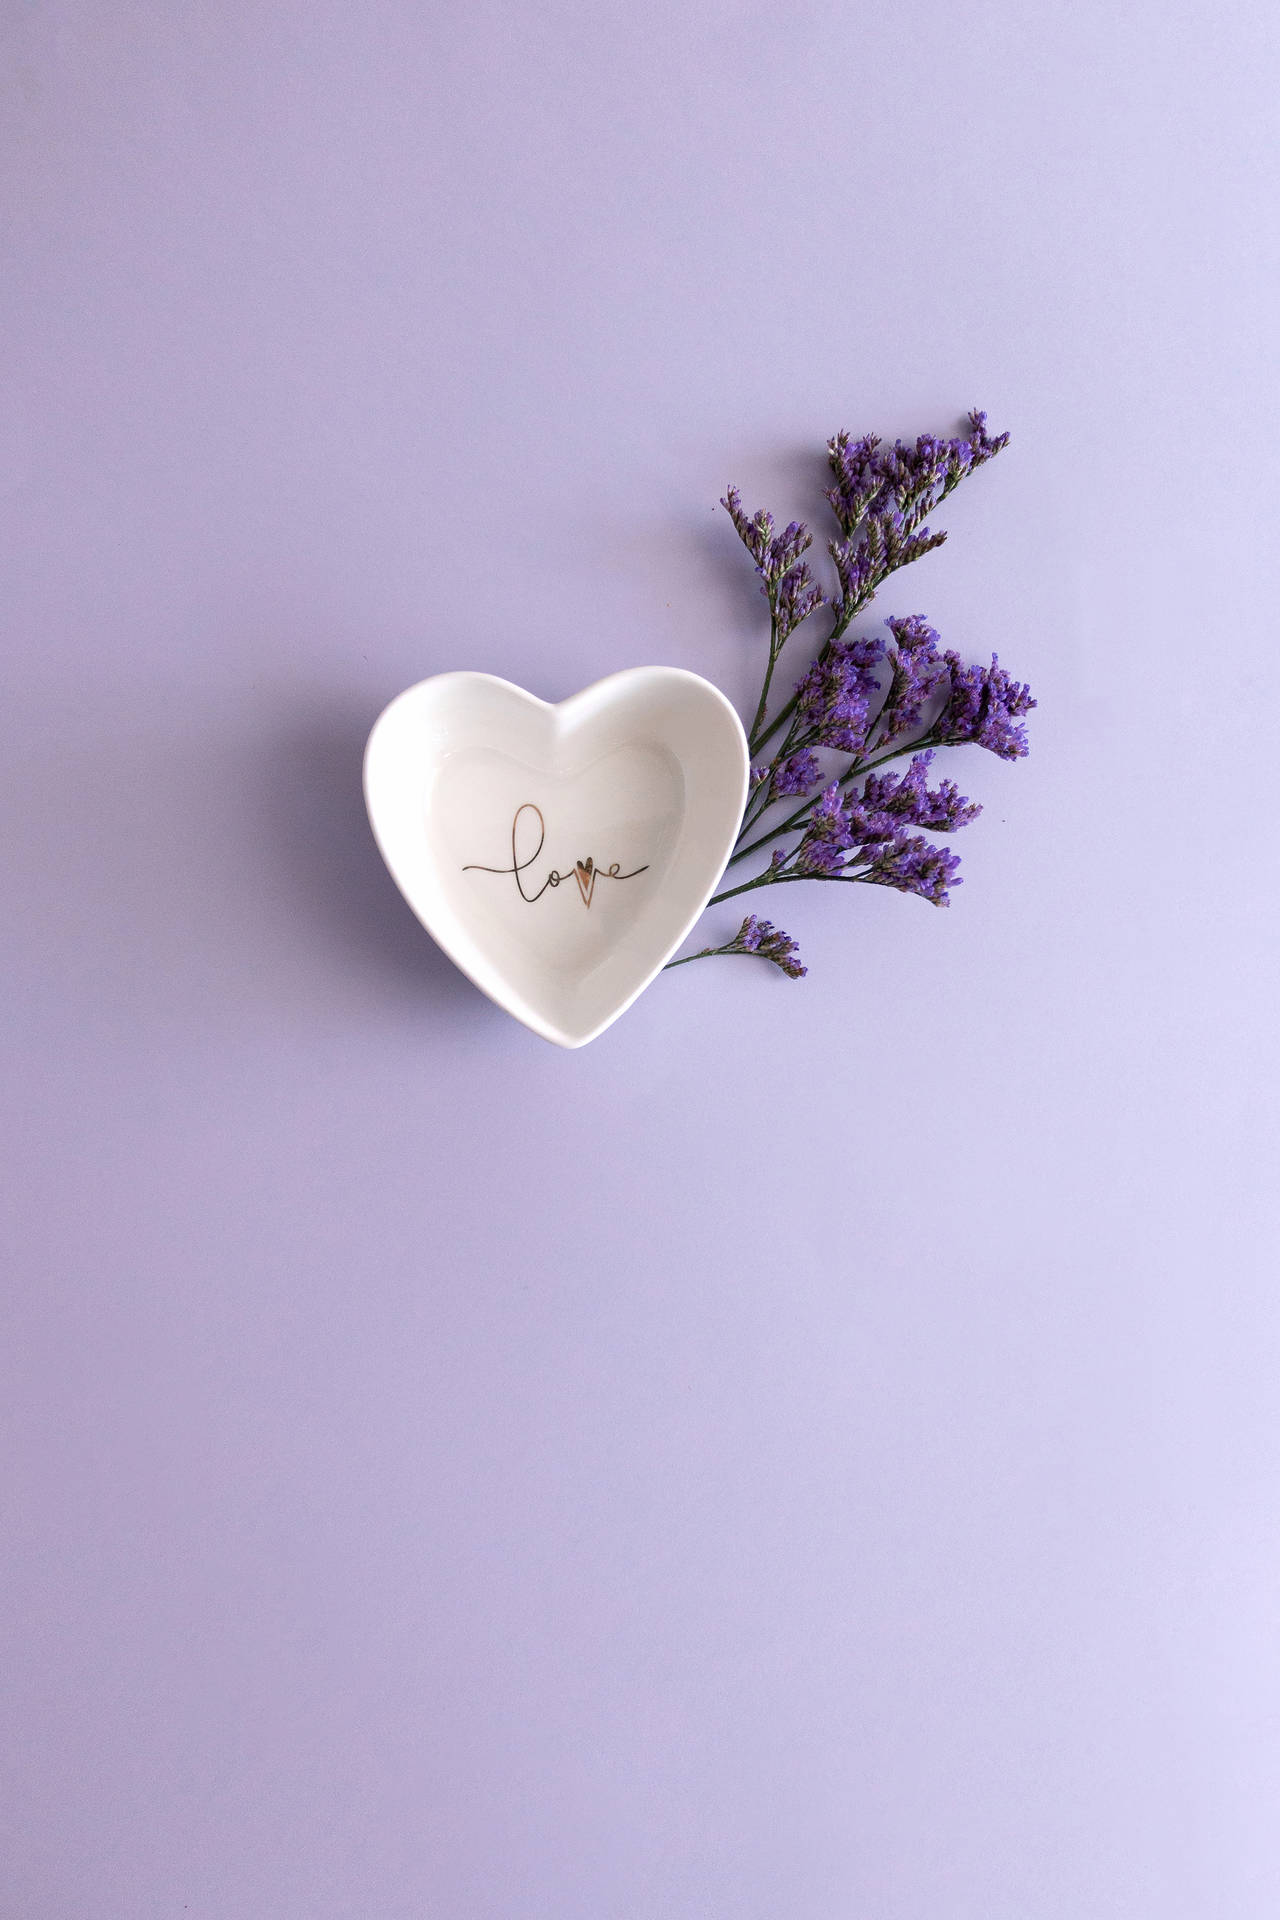 Download Heart Shaped Bowl With Flower On Purple Background Free Stock Photo Background